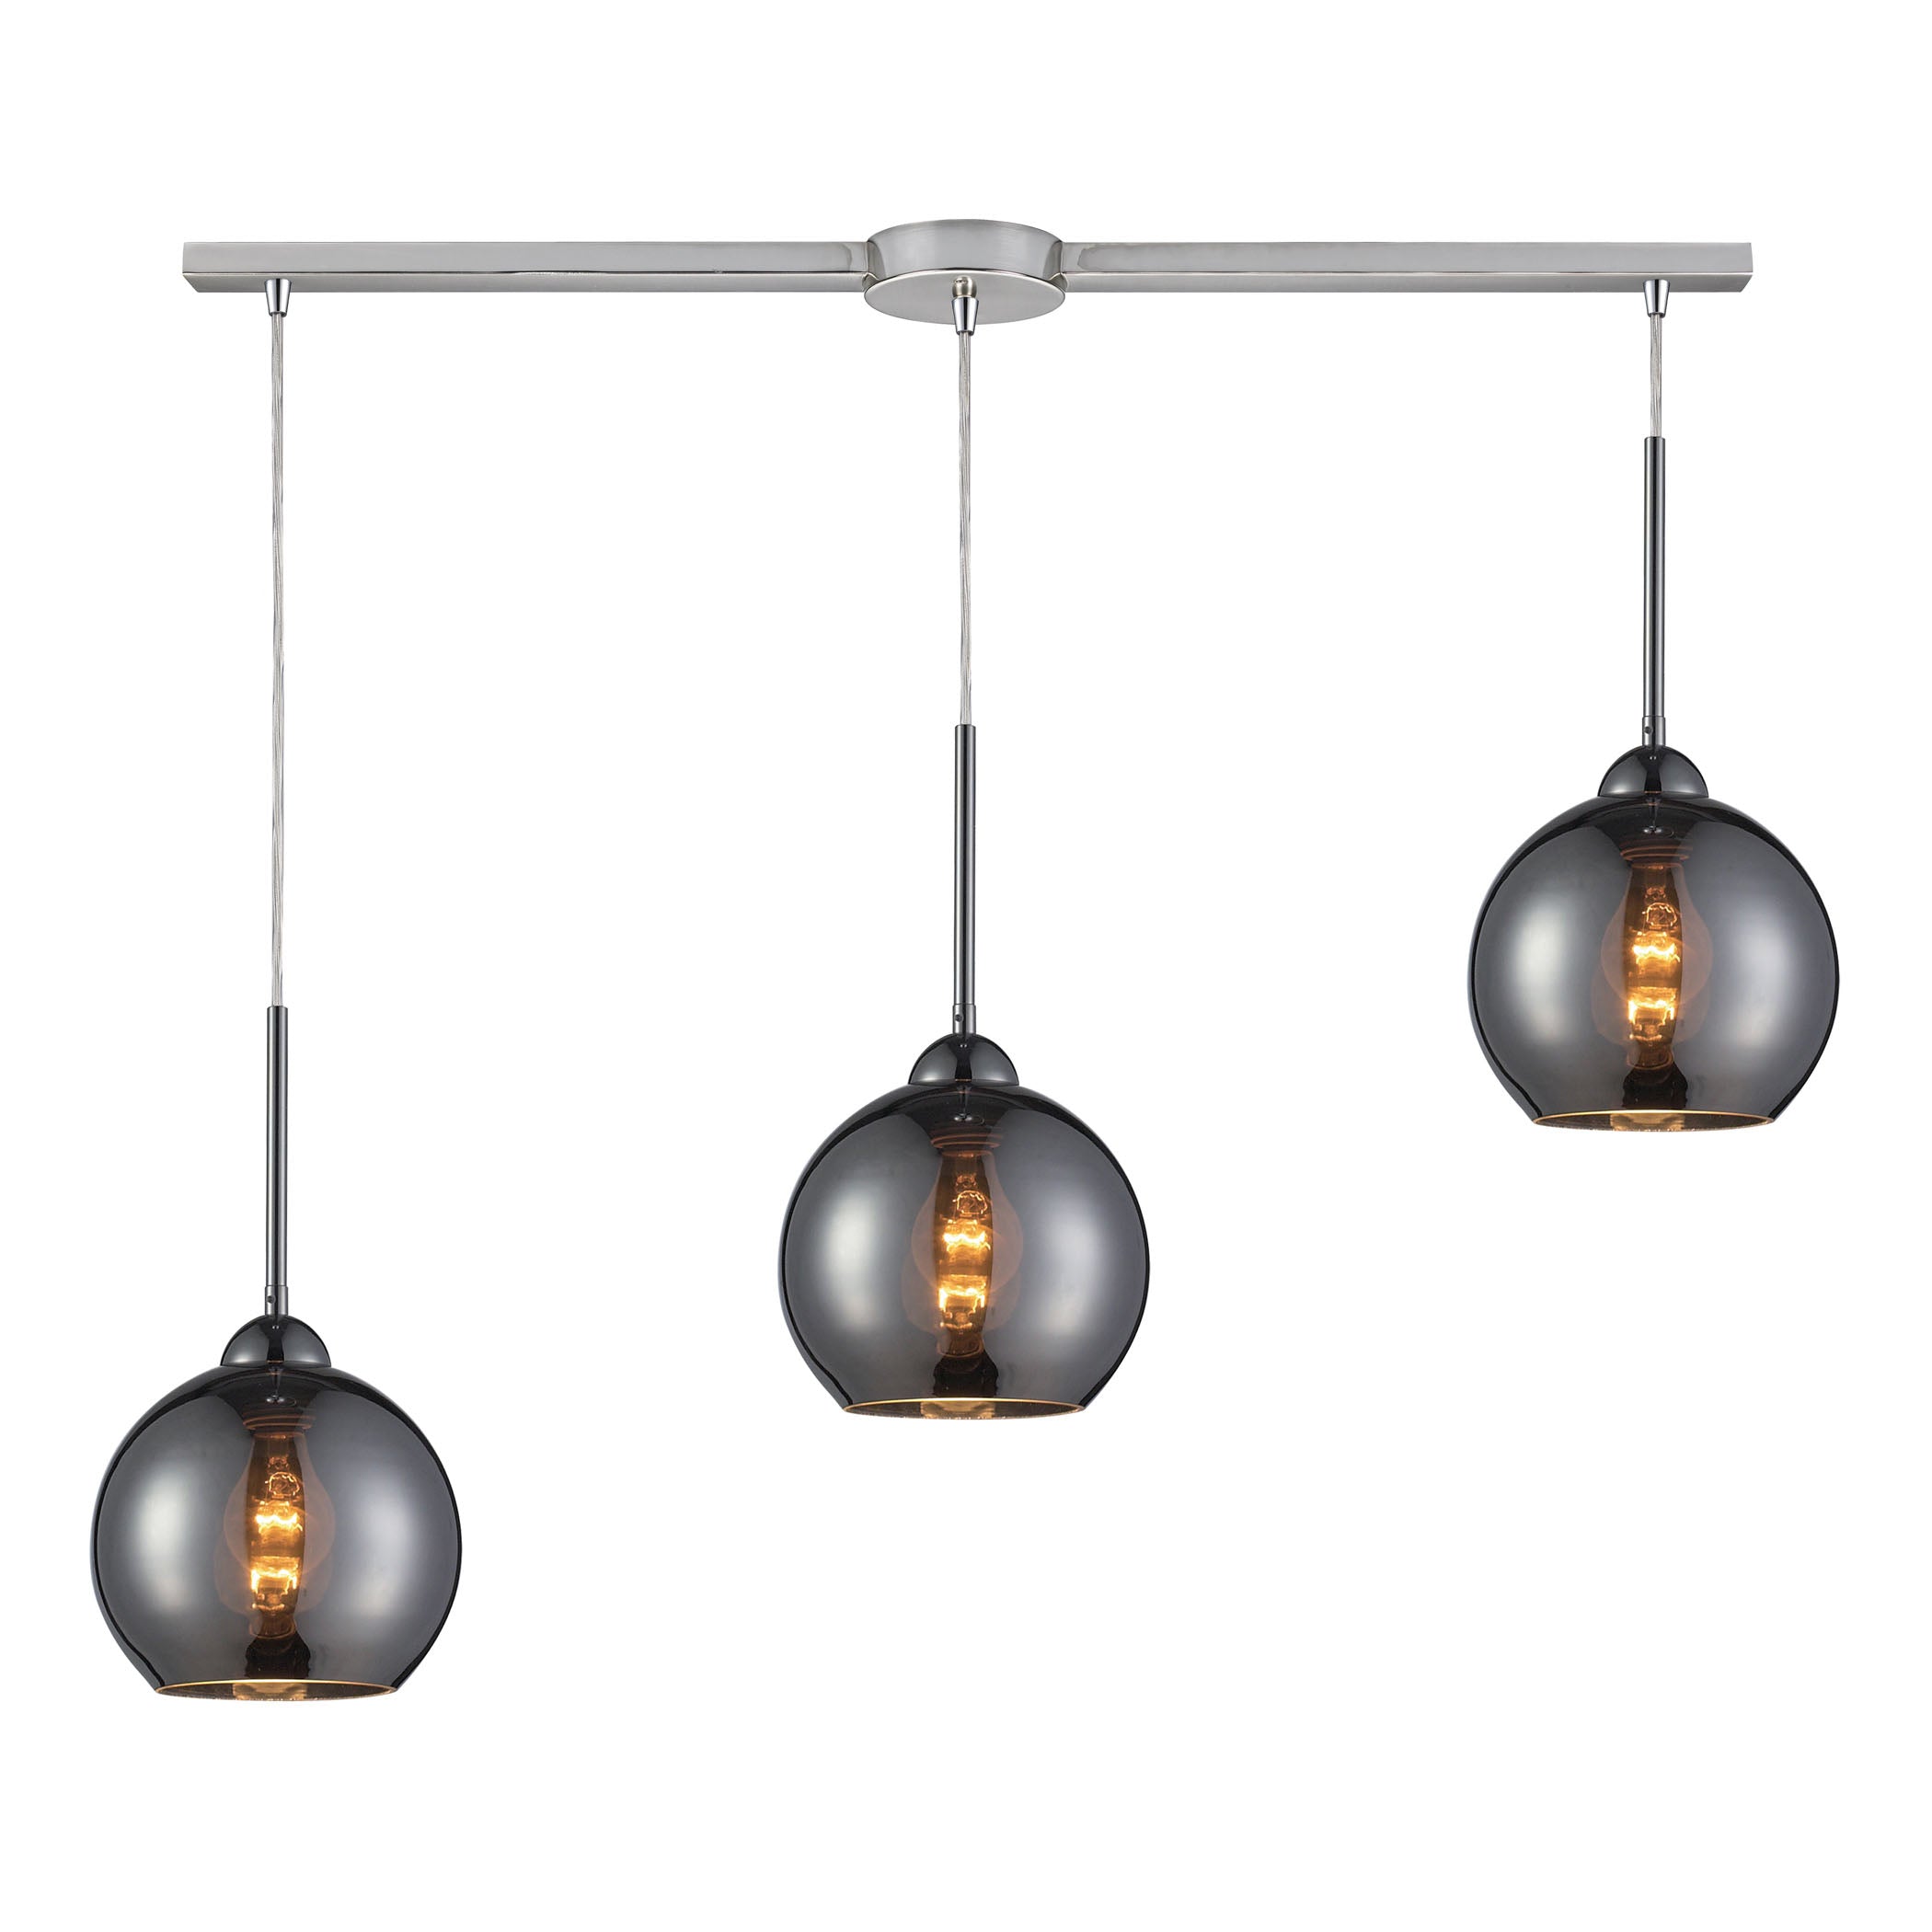 ELK Lighting 10240/3L-CHR Cassandra 3-Light Linear Pendant Fixture in Polished Chrome with Chrome-plated Glass